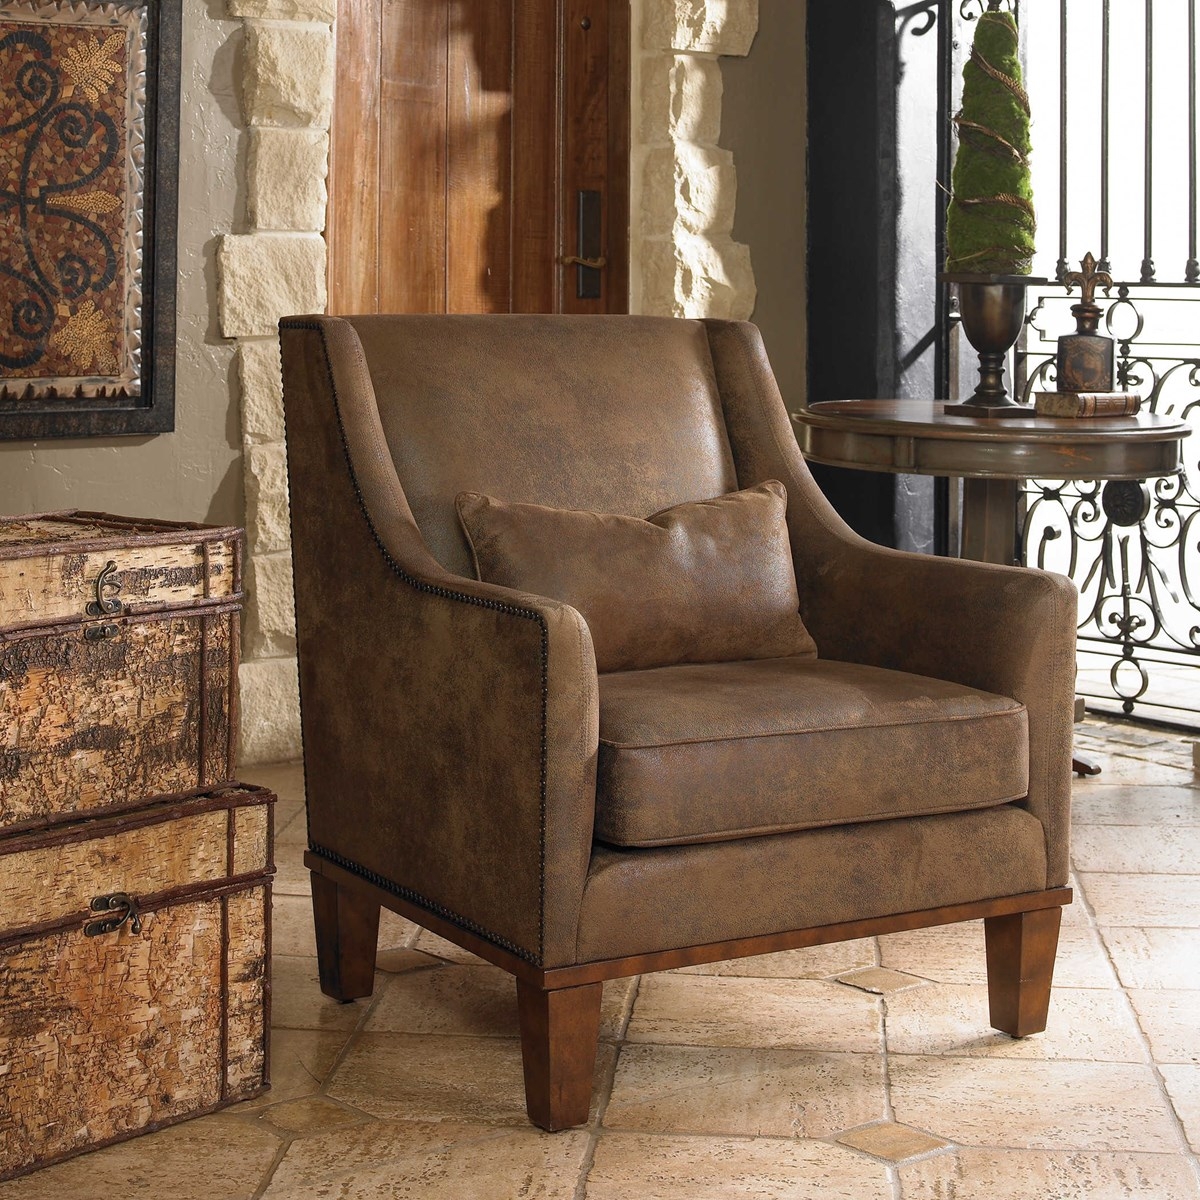 Clay Leather Armchair - Image 2